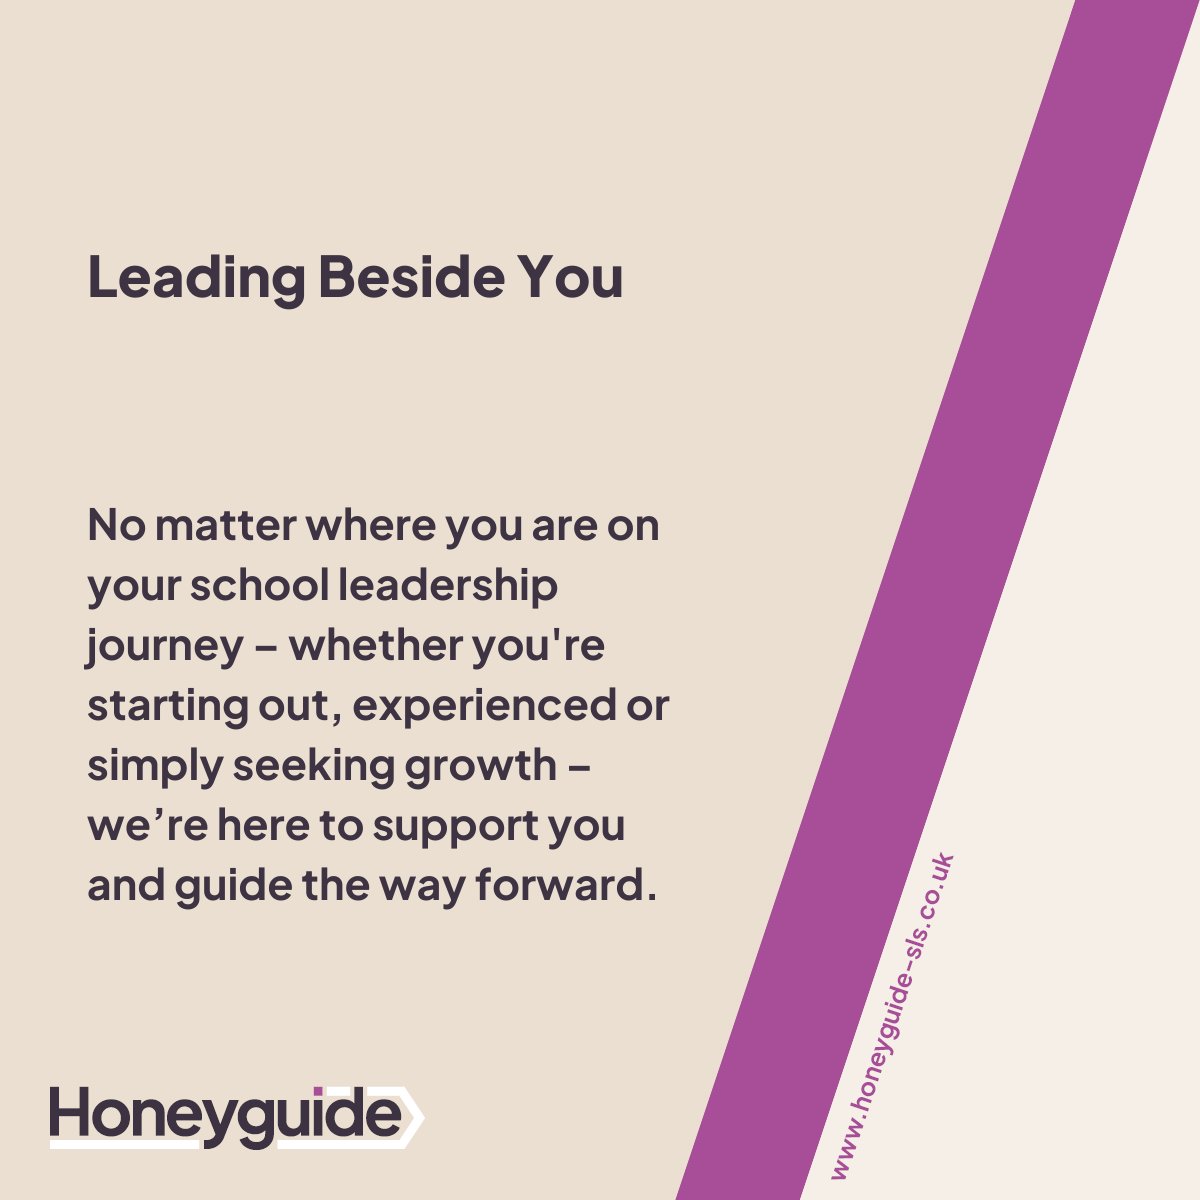 Leadership can be incredibly lonely, so let's do this together. Who's in?

#edutwitter #education #schoolleadership #schoolleaders #teachertwitter #middleleaders #headteacher #newtoslt #first100daysHT #LeadershipDevelopment #LeadershipMatters #wellbeing #headteachersoftwitter